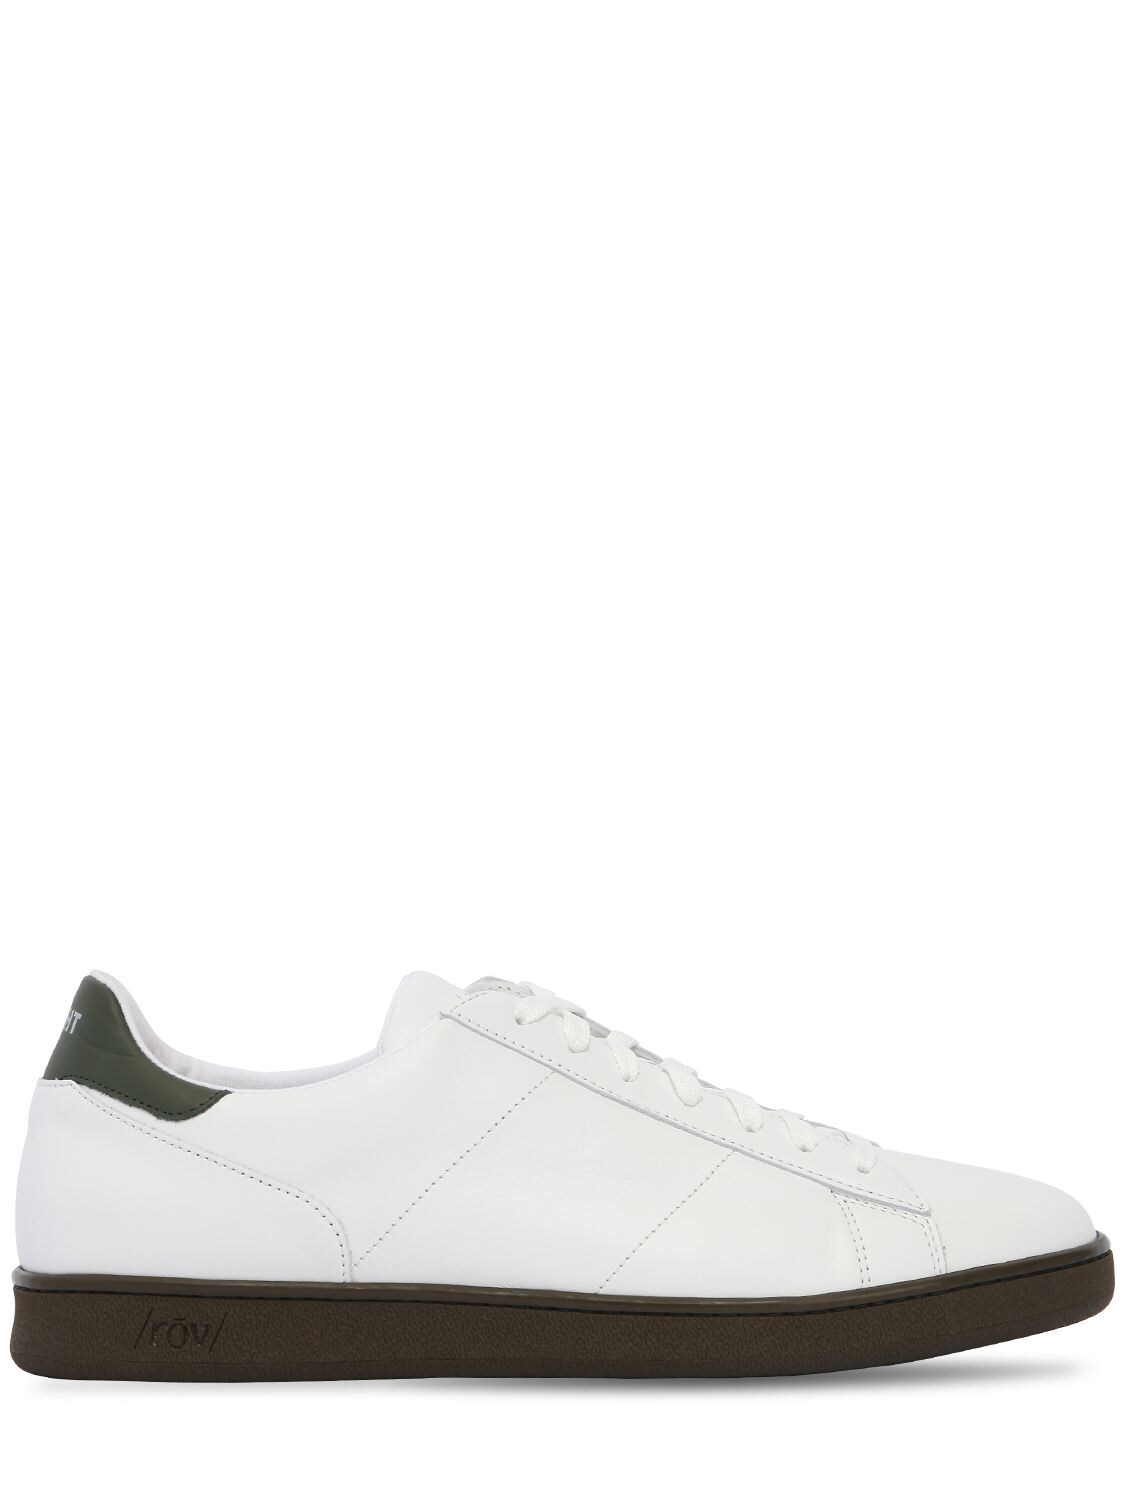 Rov Leather Colored Sole Sneakers In White/army